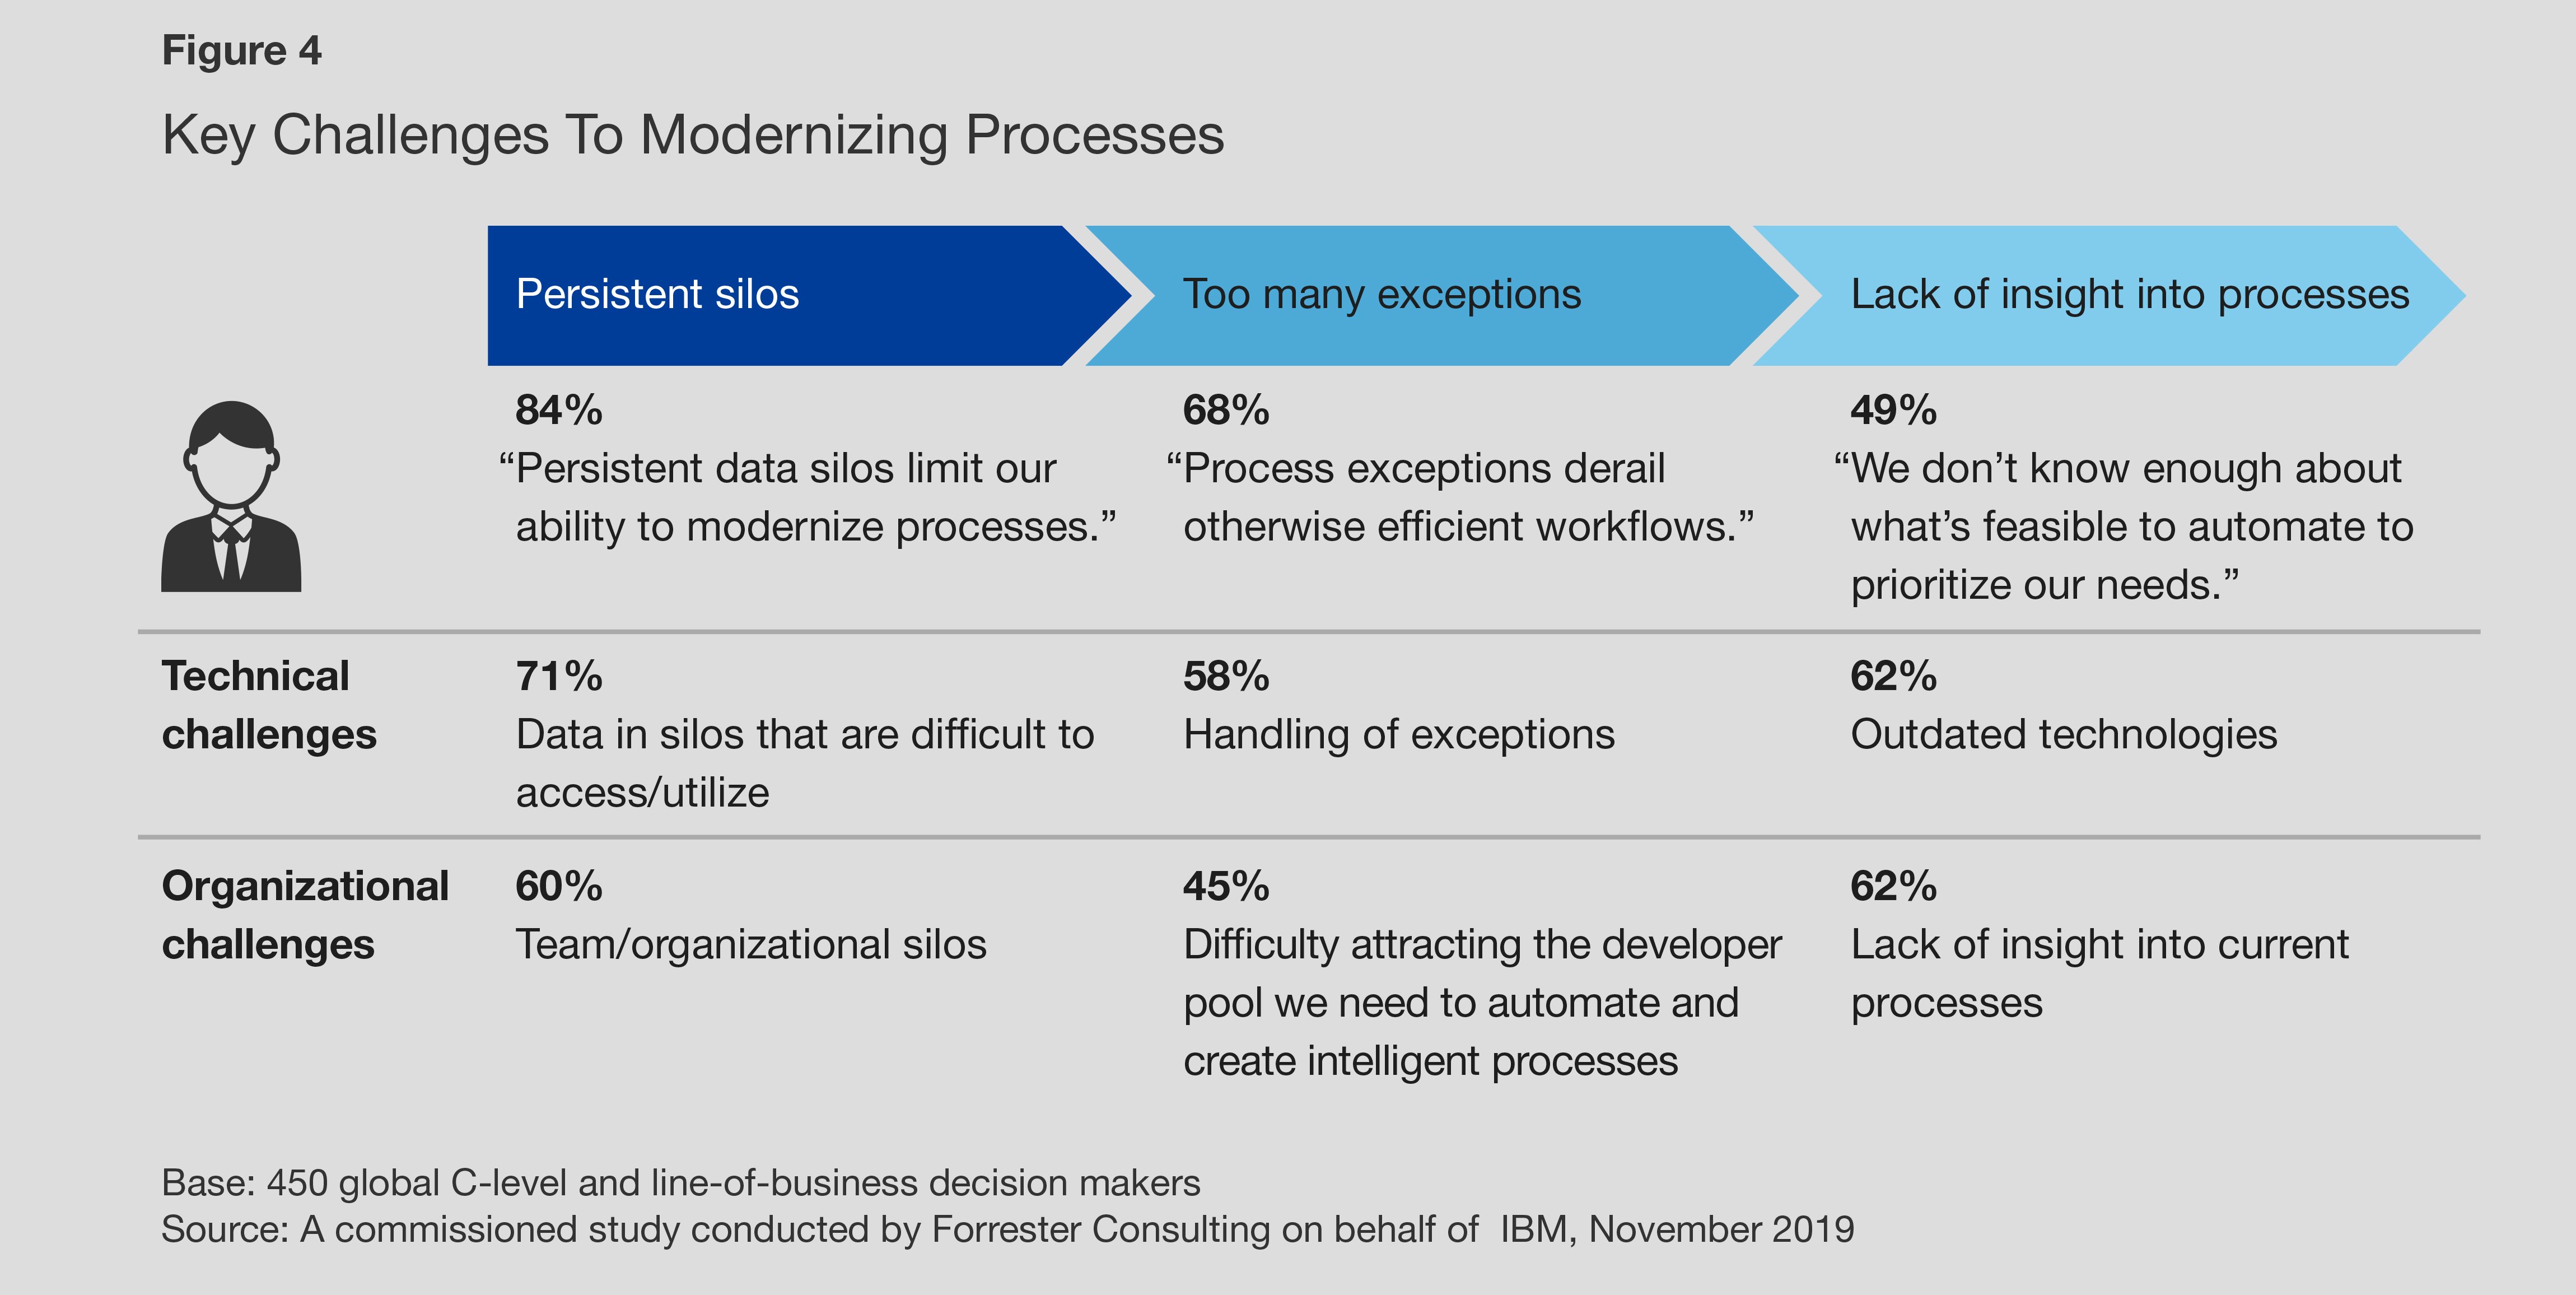 Key Challenges to Modernizing Processes